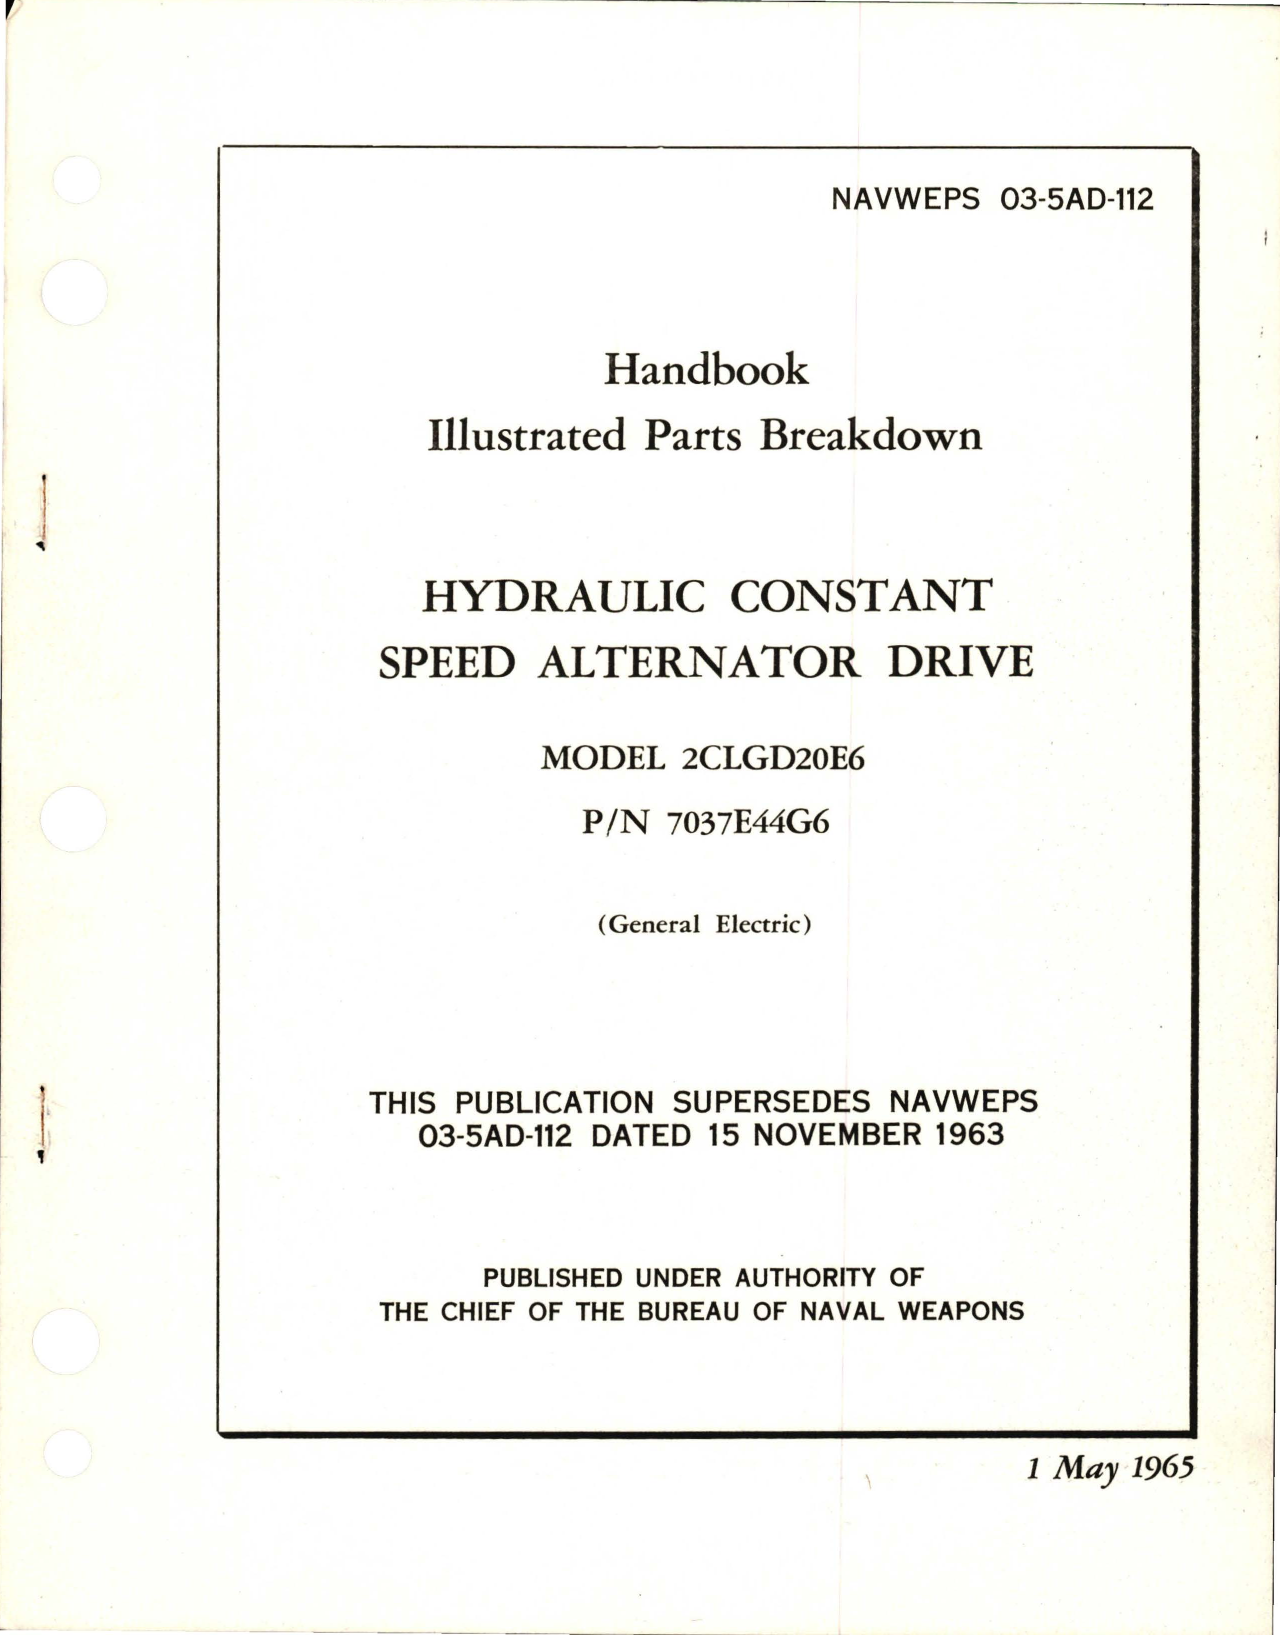 Sample page 1 from AirCorps Library document: Illustrated Parts Breakdown for Hydraulic Constant Speed Alternator Drive - Model 2CLGD20E6 - Part 7037E44G6 